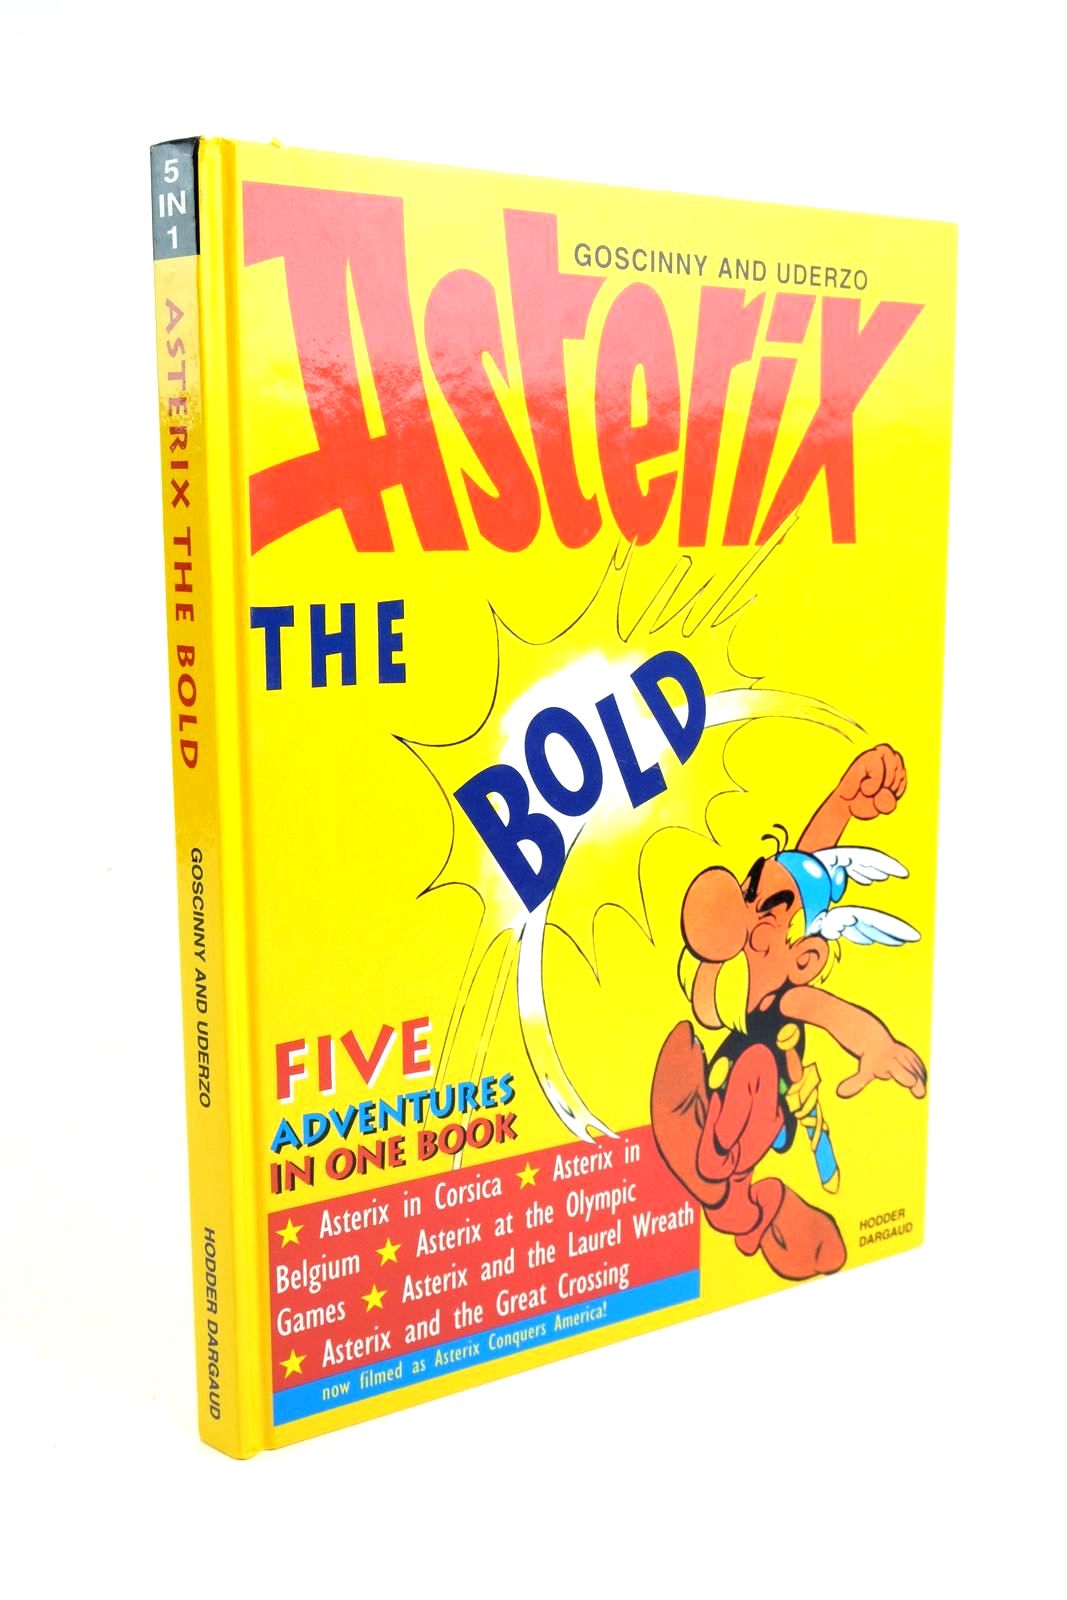 Photo of ASTERIX THE BOLD- Stock Number: 1322130